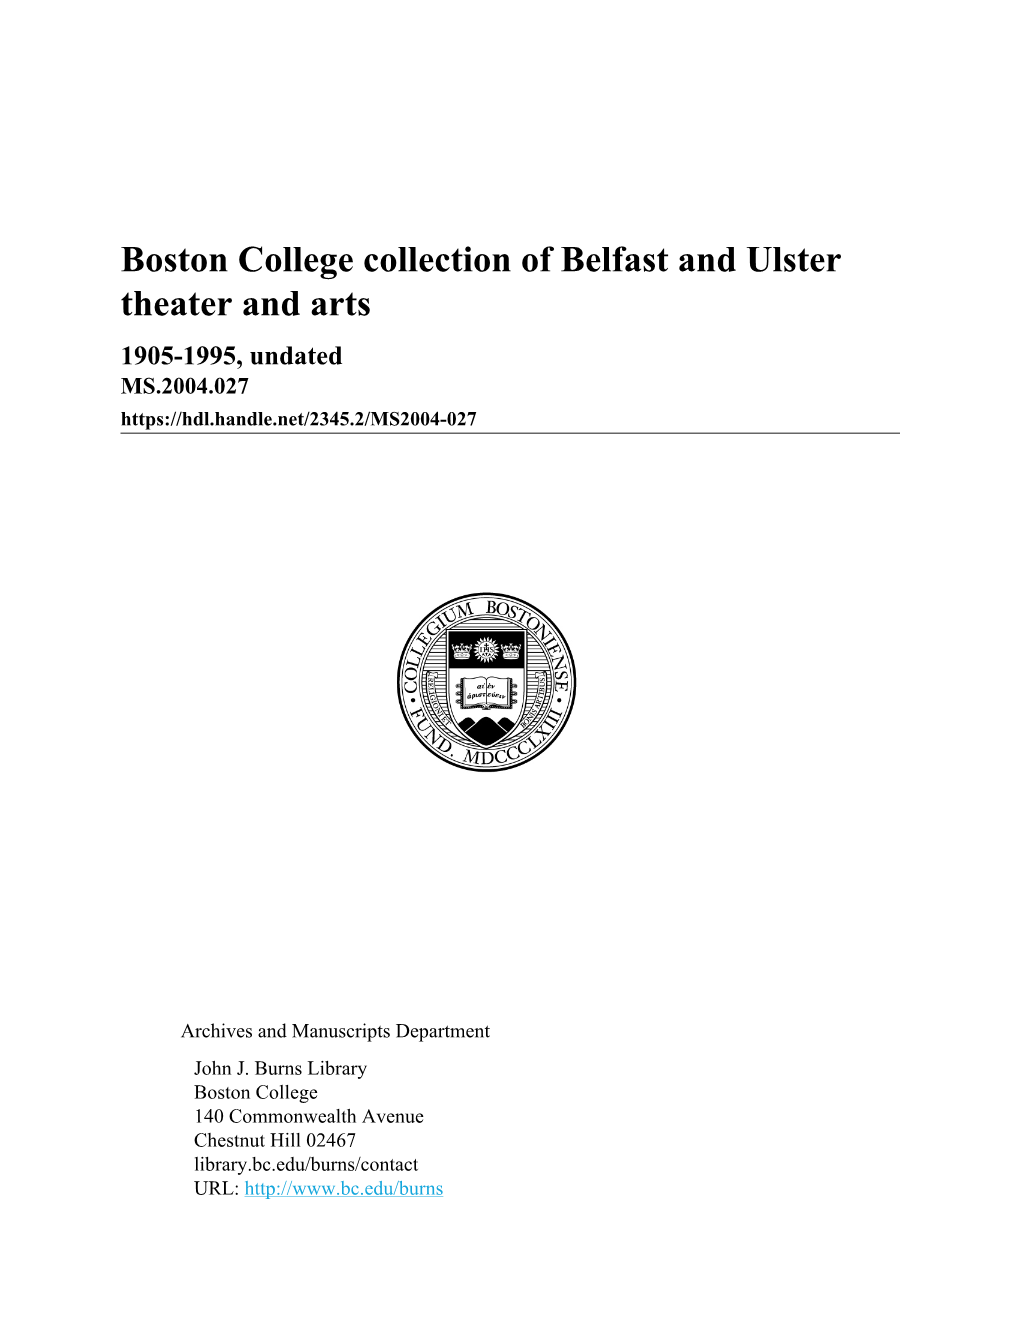 Boston College Collection of Belfast and Ulster Theater and Arts 1905-1995, Undated MS.2004.027